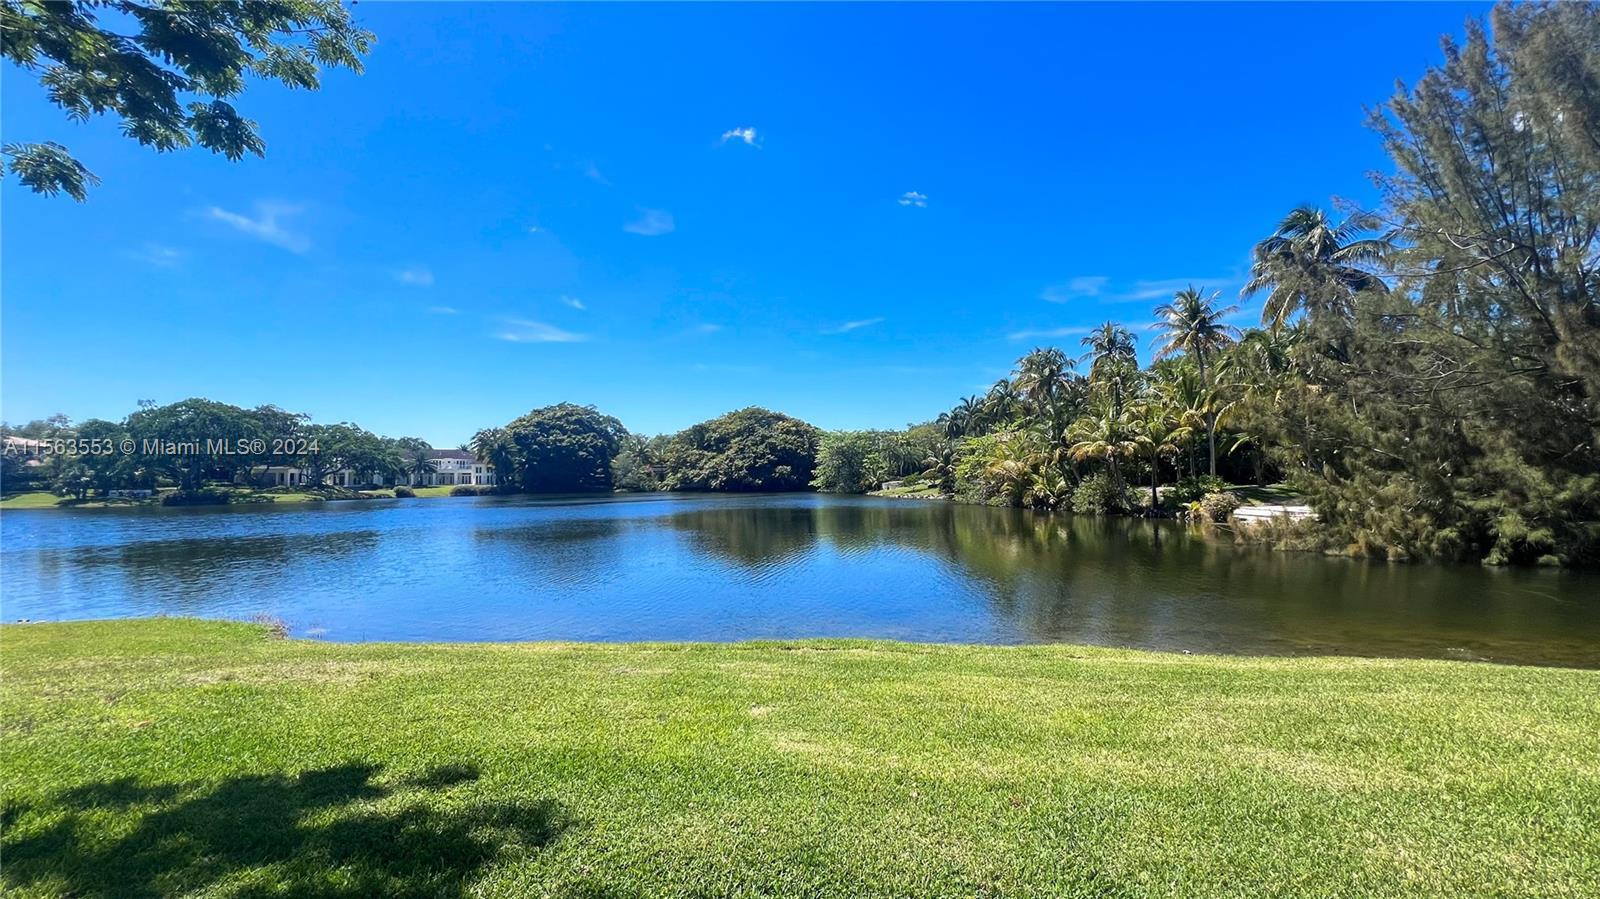 Photo of 10600 Lakeside Dr in Coral Gables, FL